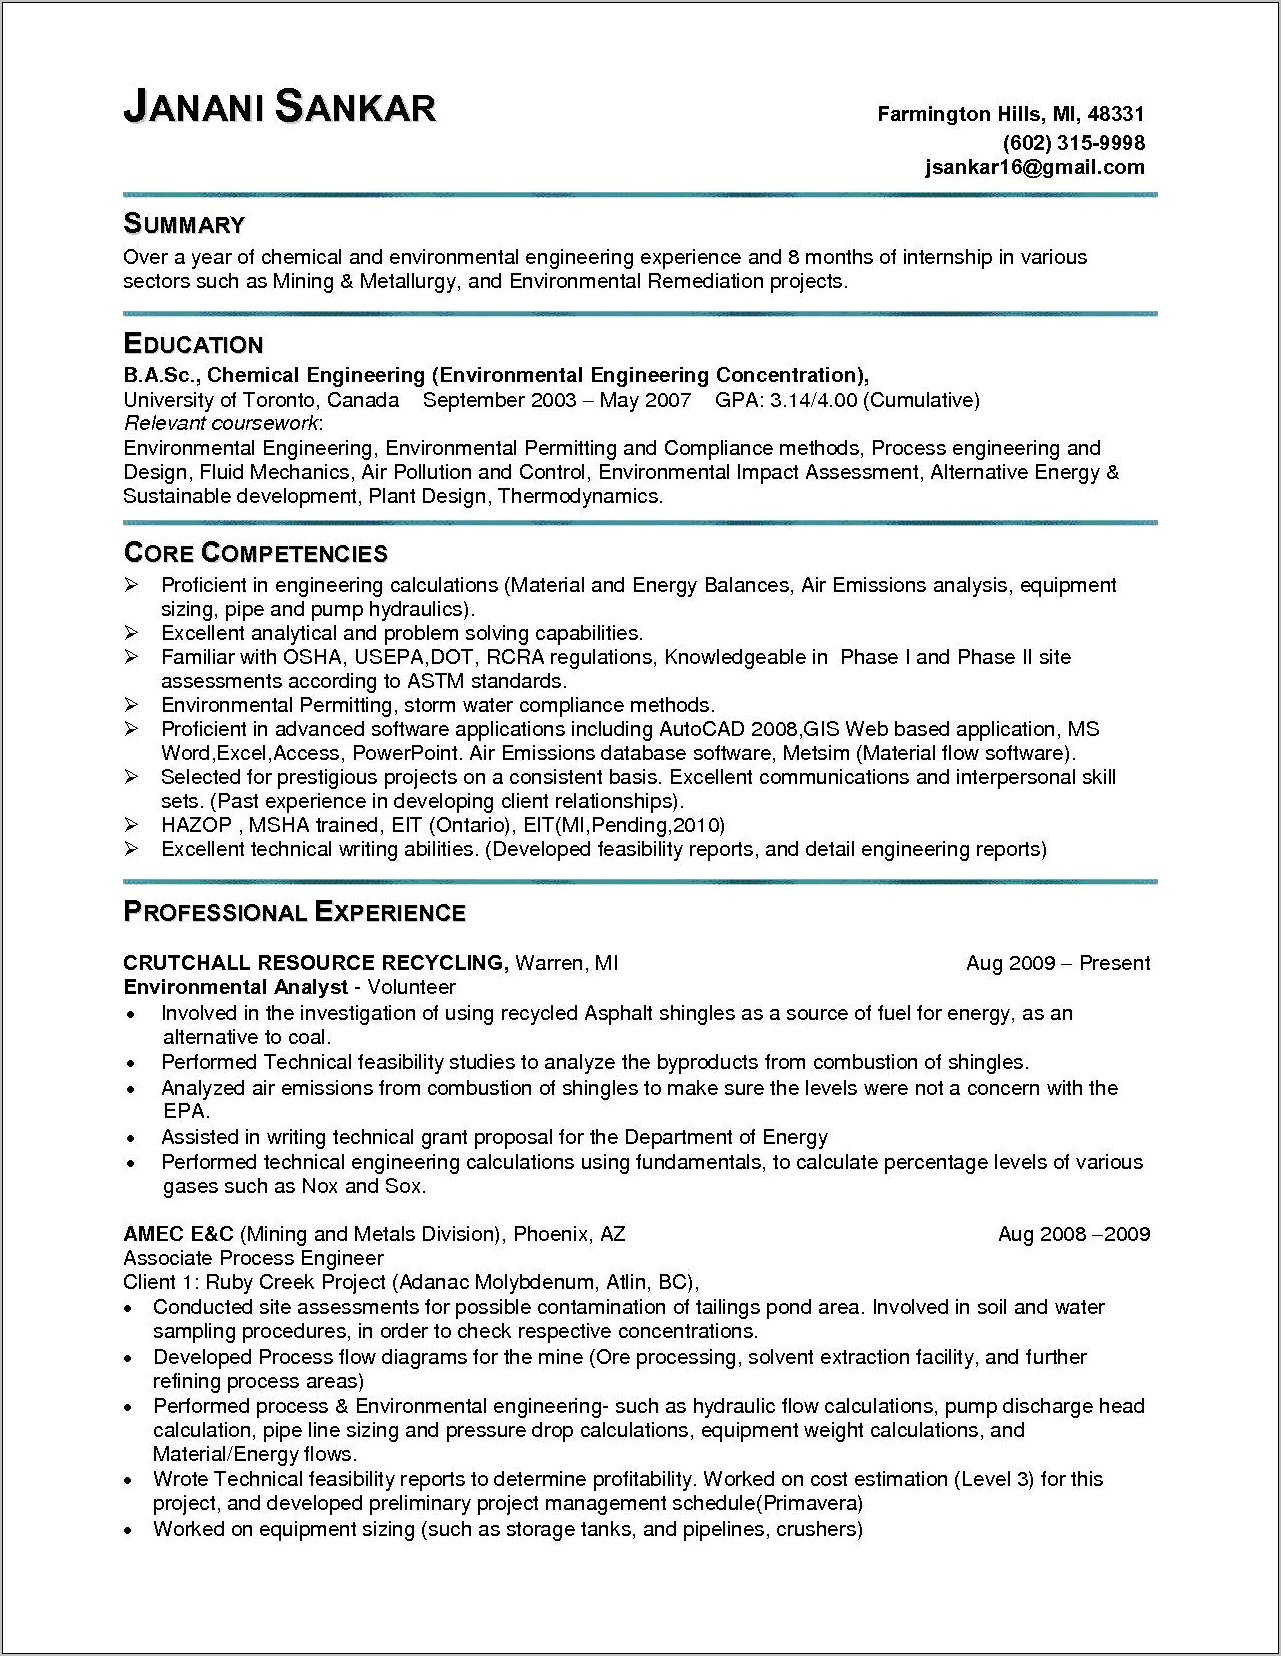 Electrical Engineering Objective Entry Level Resume